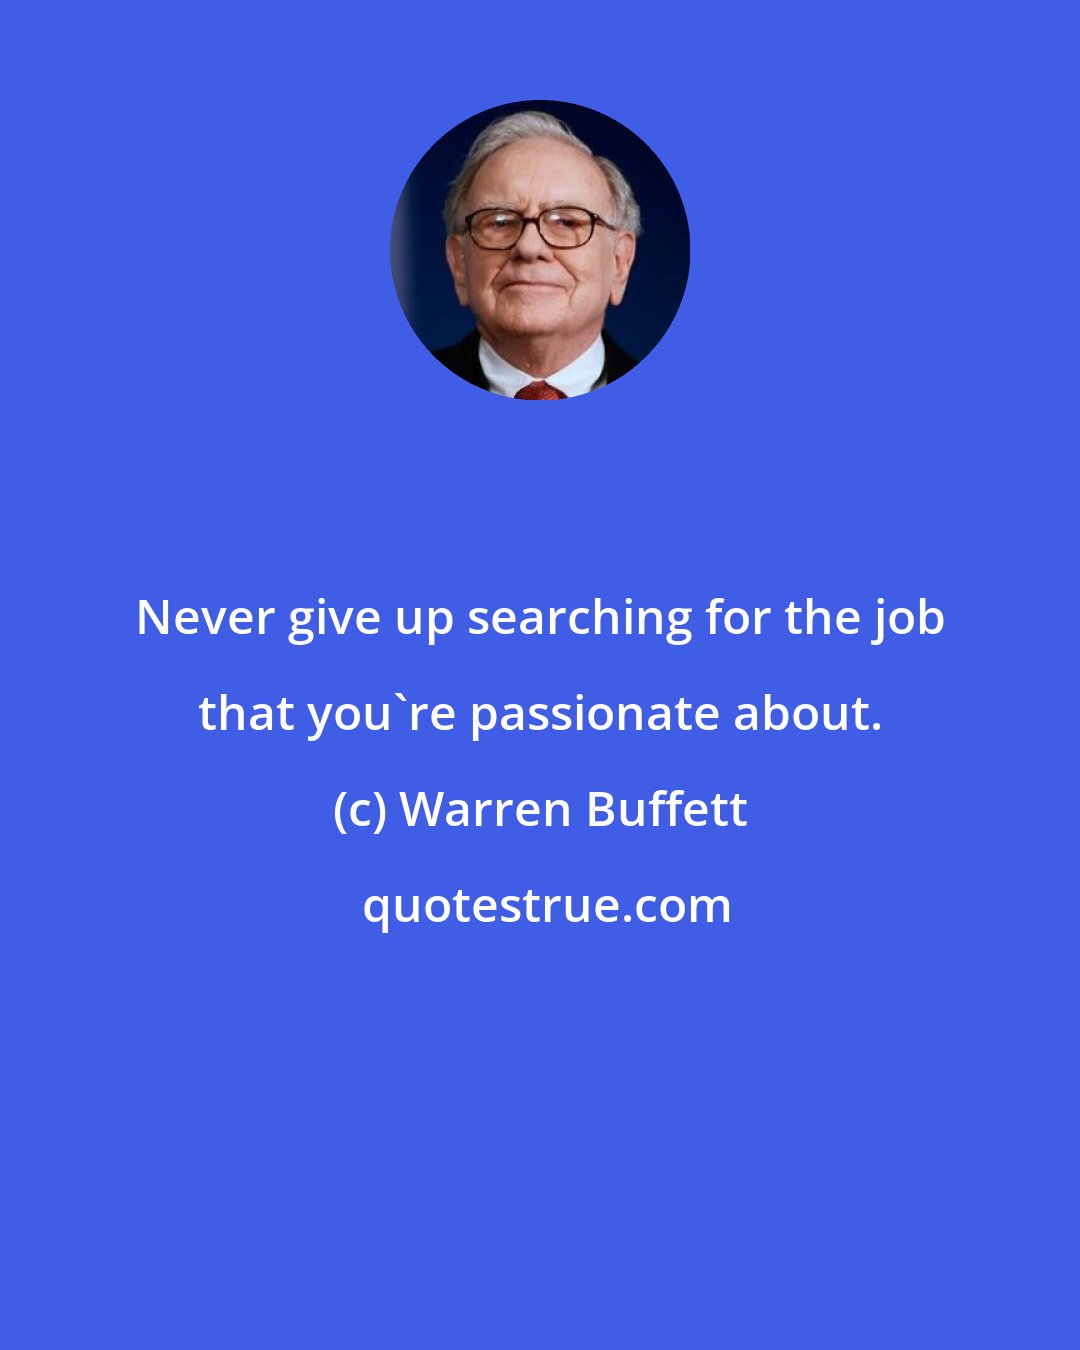 Warren Buffett: Never give up searching for the job that you're passionate about.